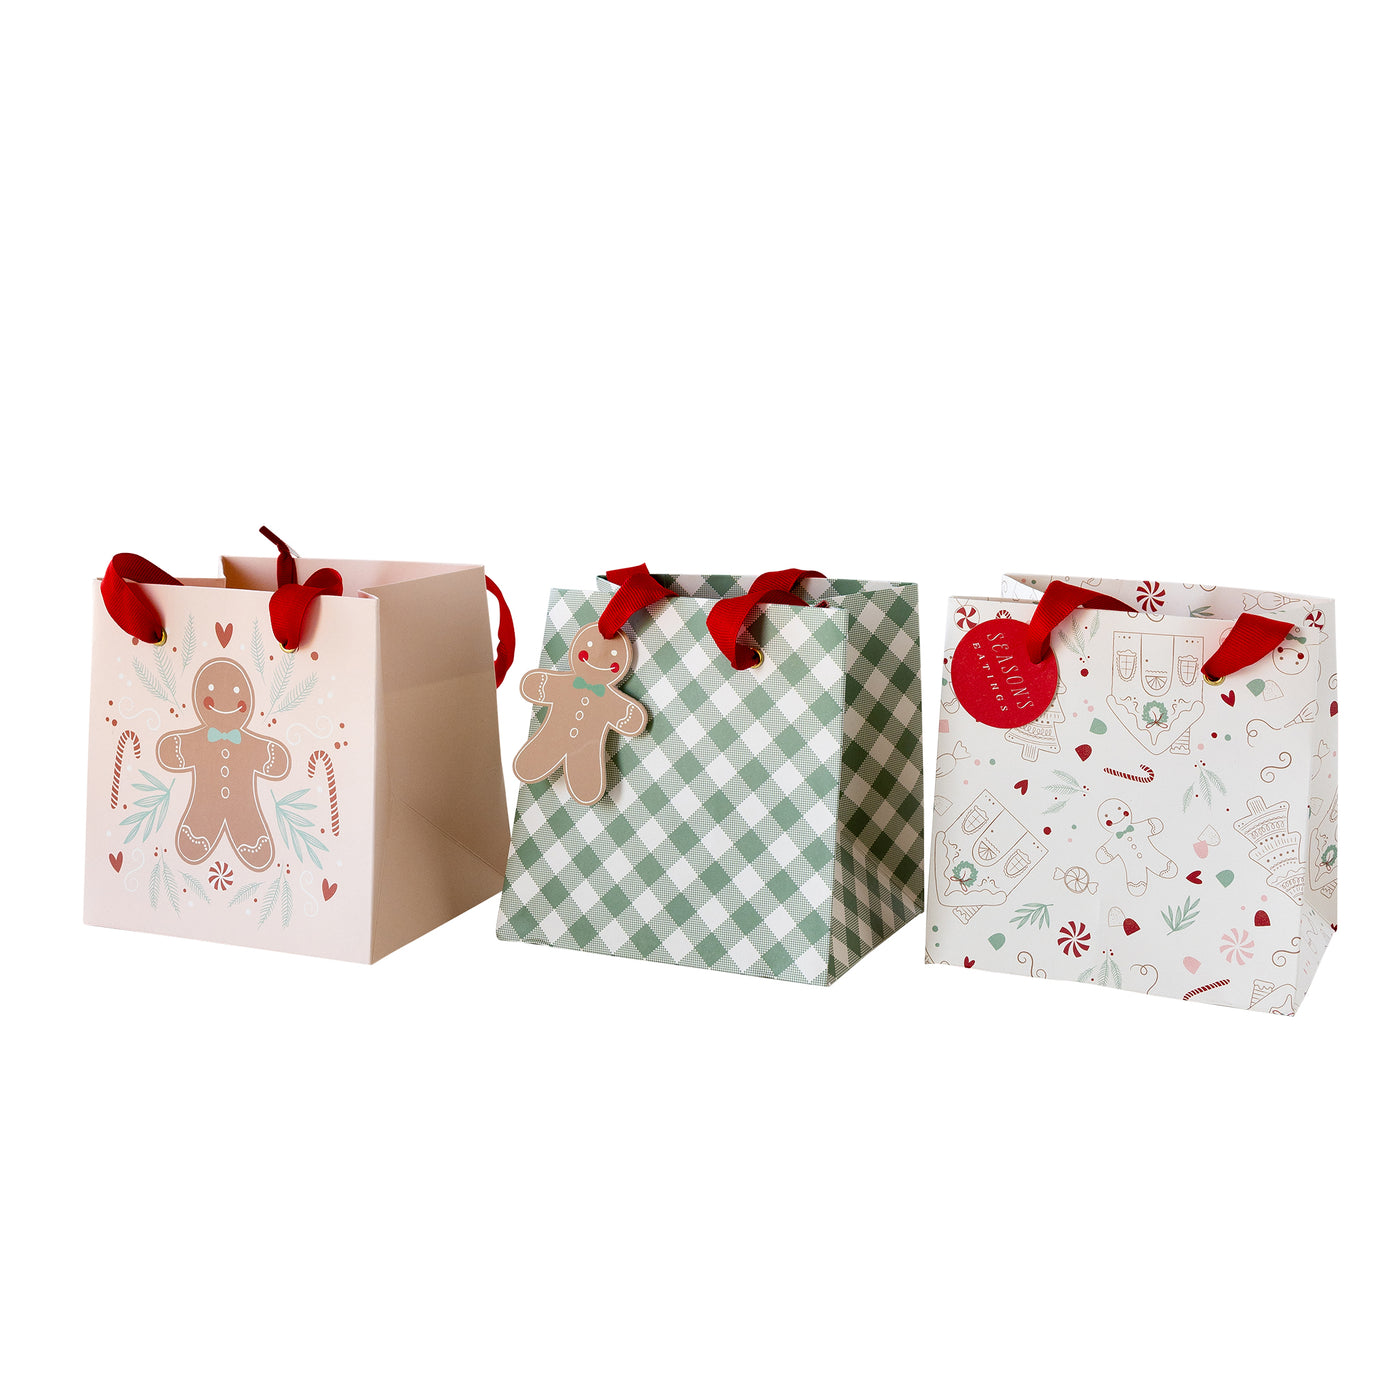 PLGBS62A - Ginger and Cane Mini Gift Bag Set of 6